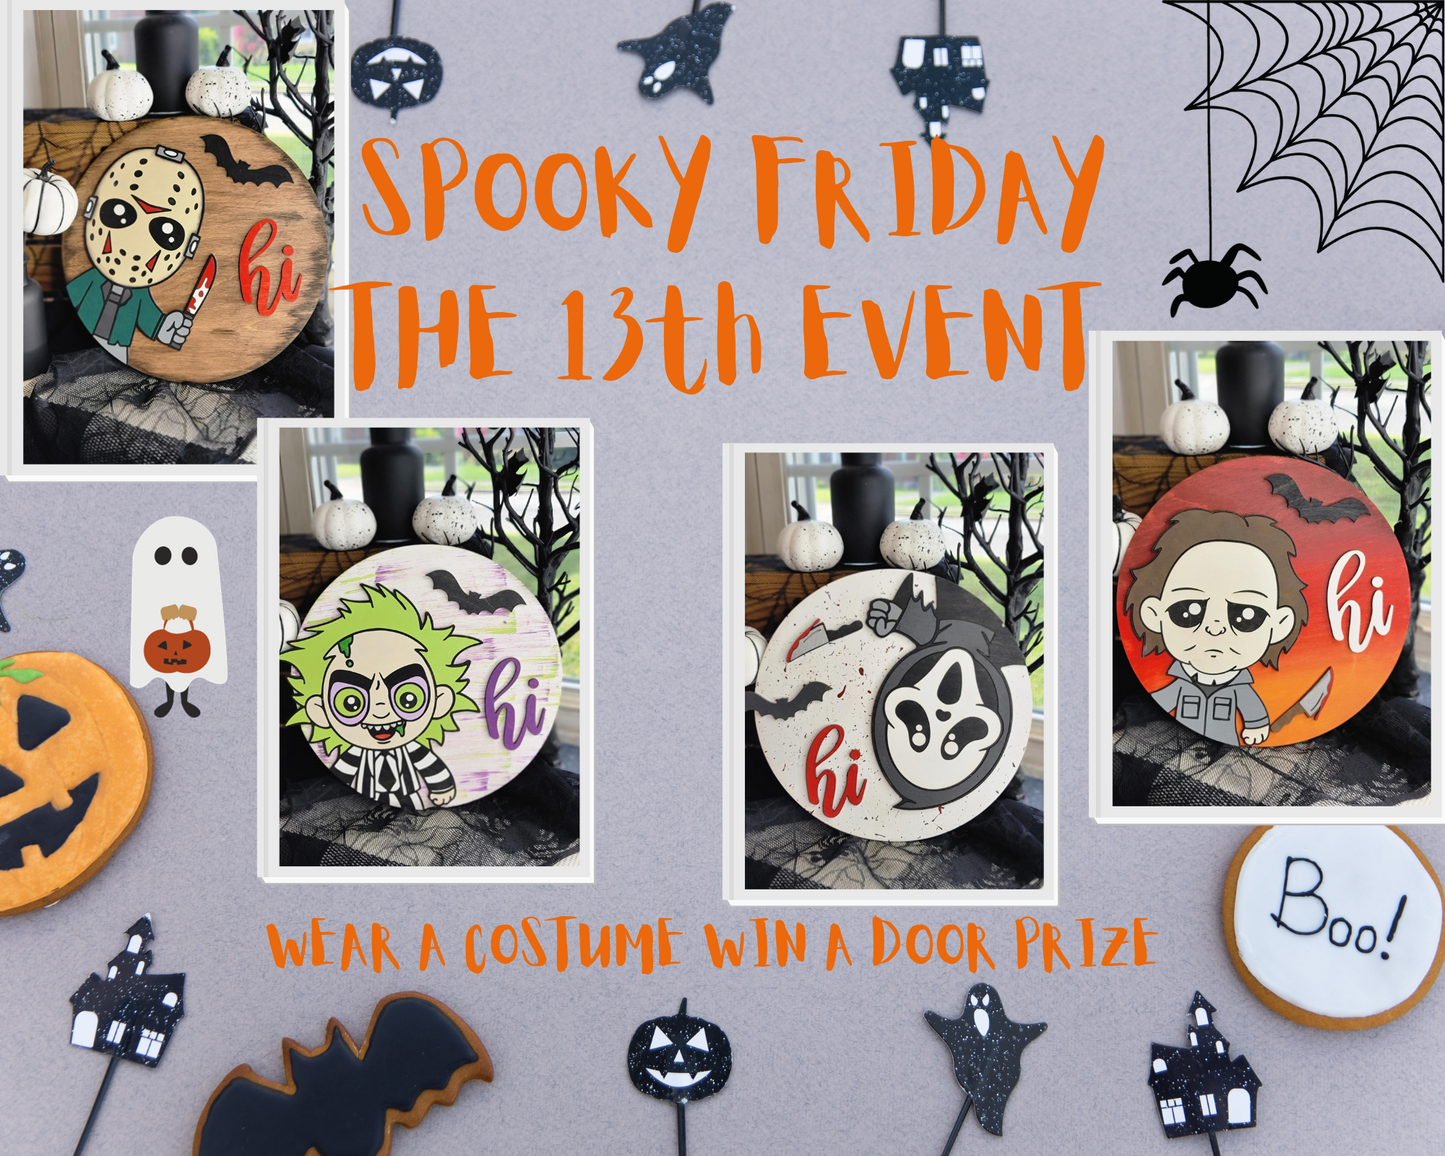 Spooky Friday the 13th Event